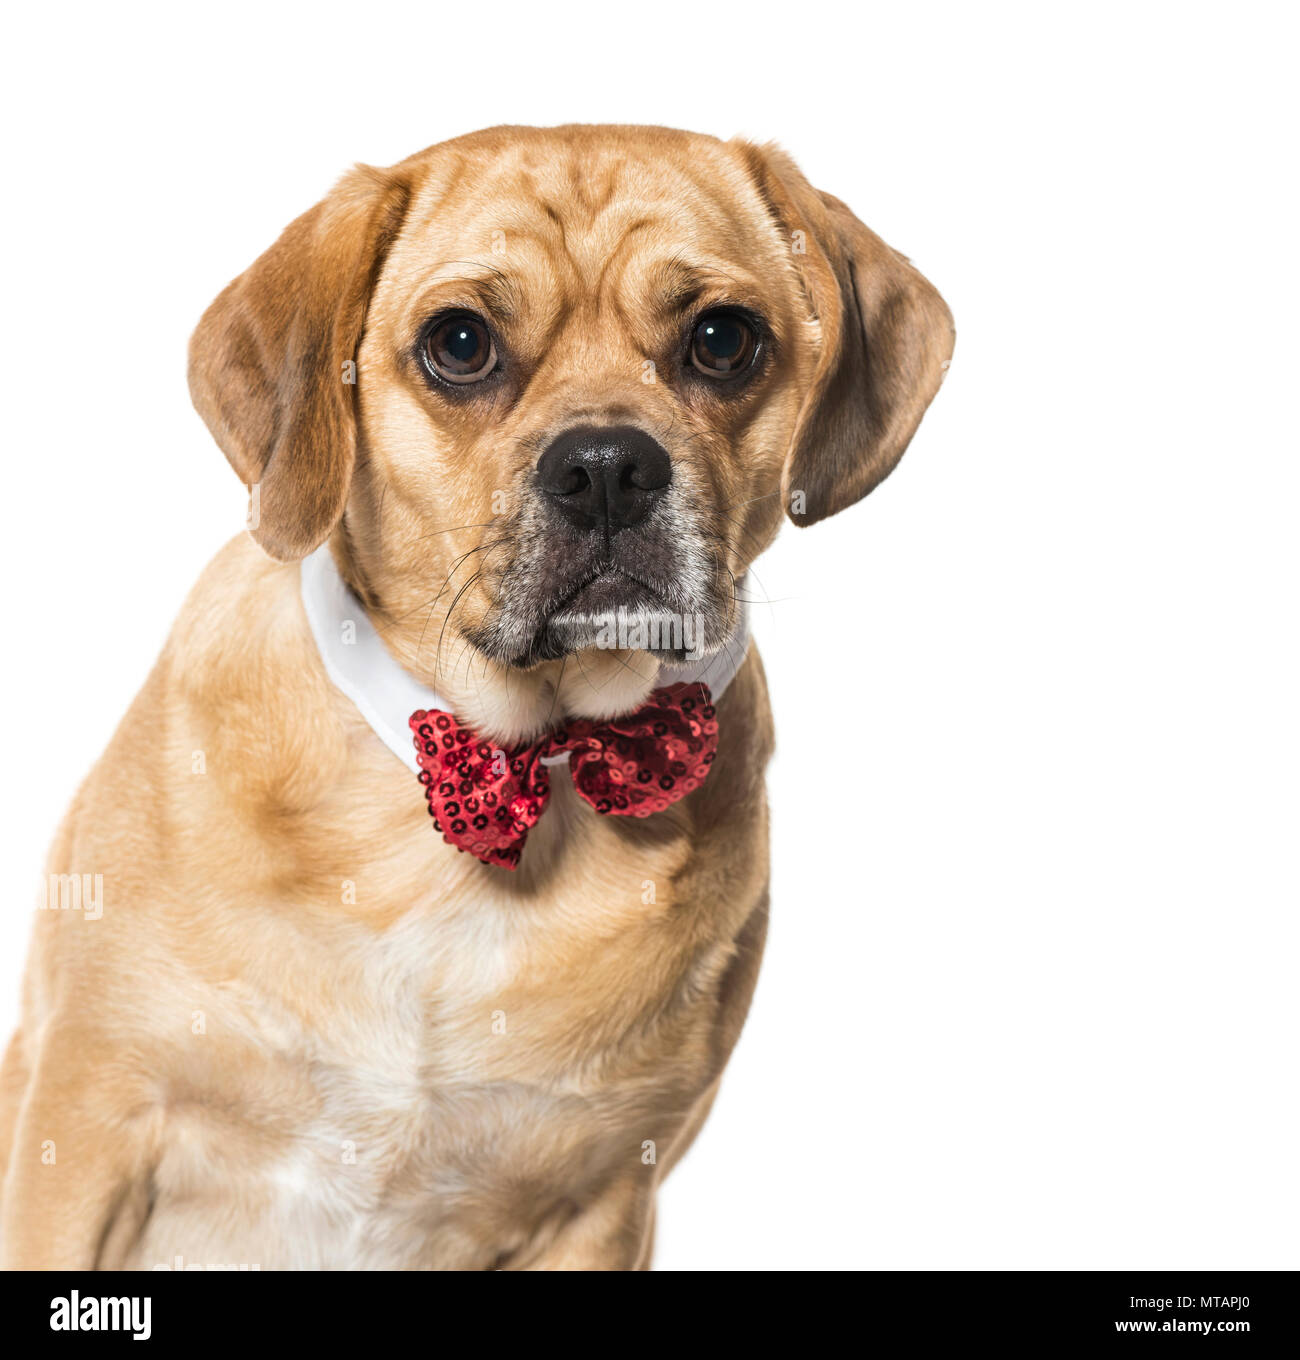 Mixed breed dog in red bow tie against white background Stock Photo